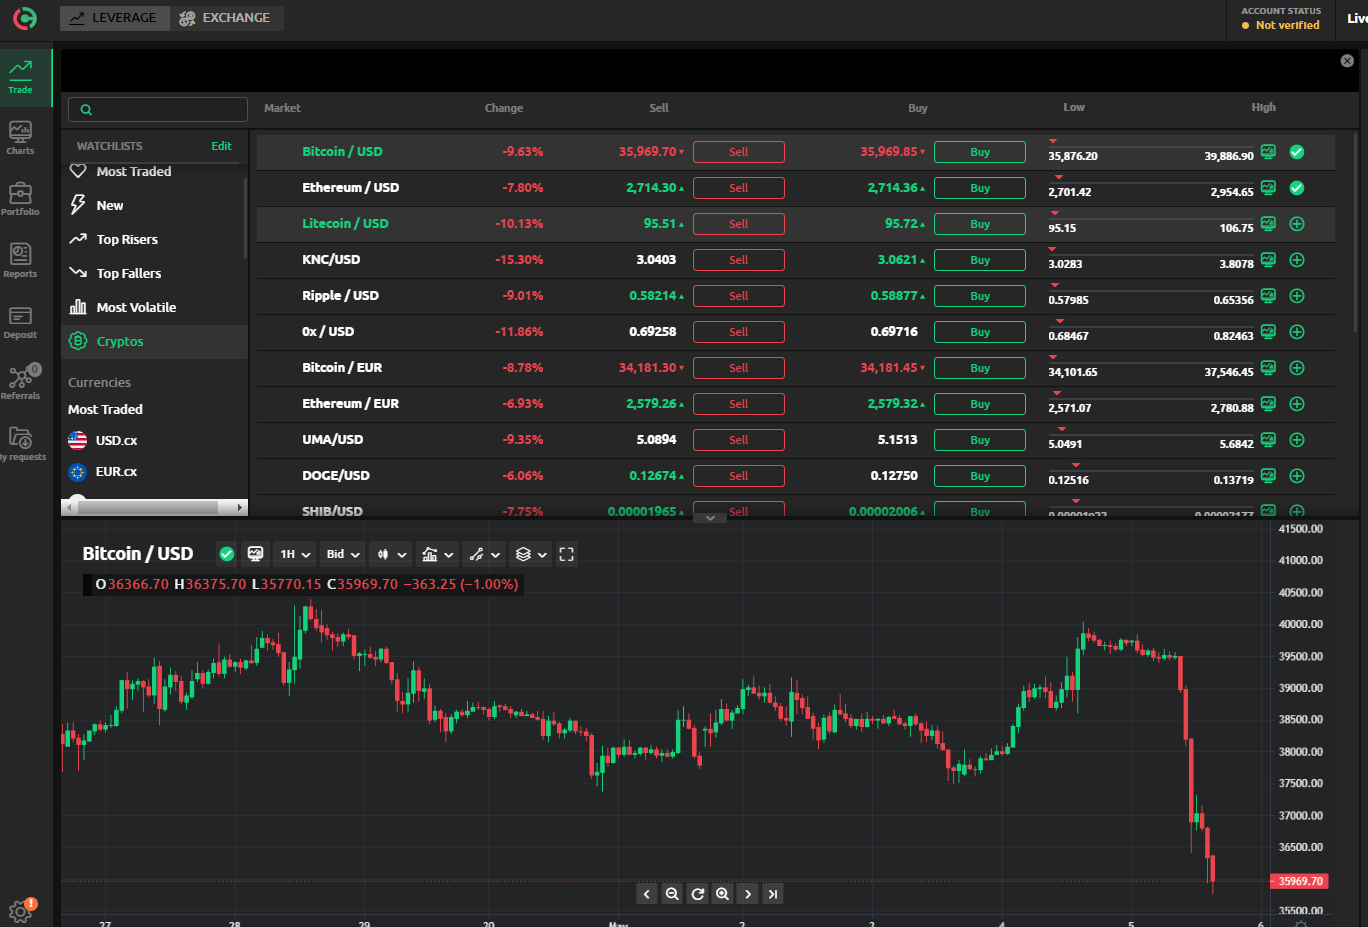 Screenshot of the Currency.com trading interface